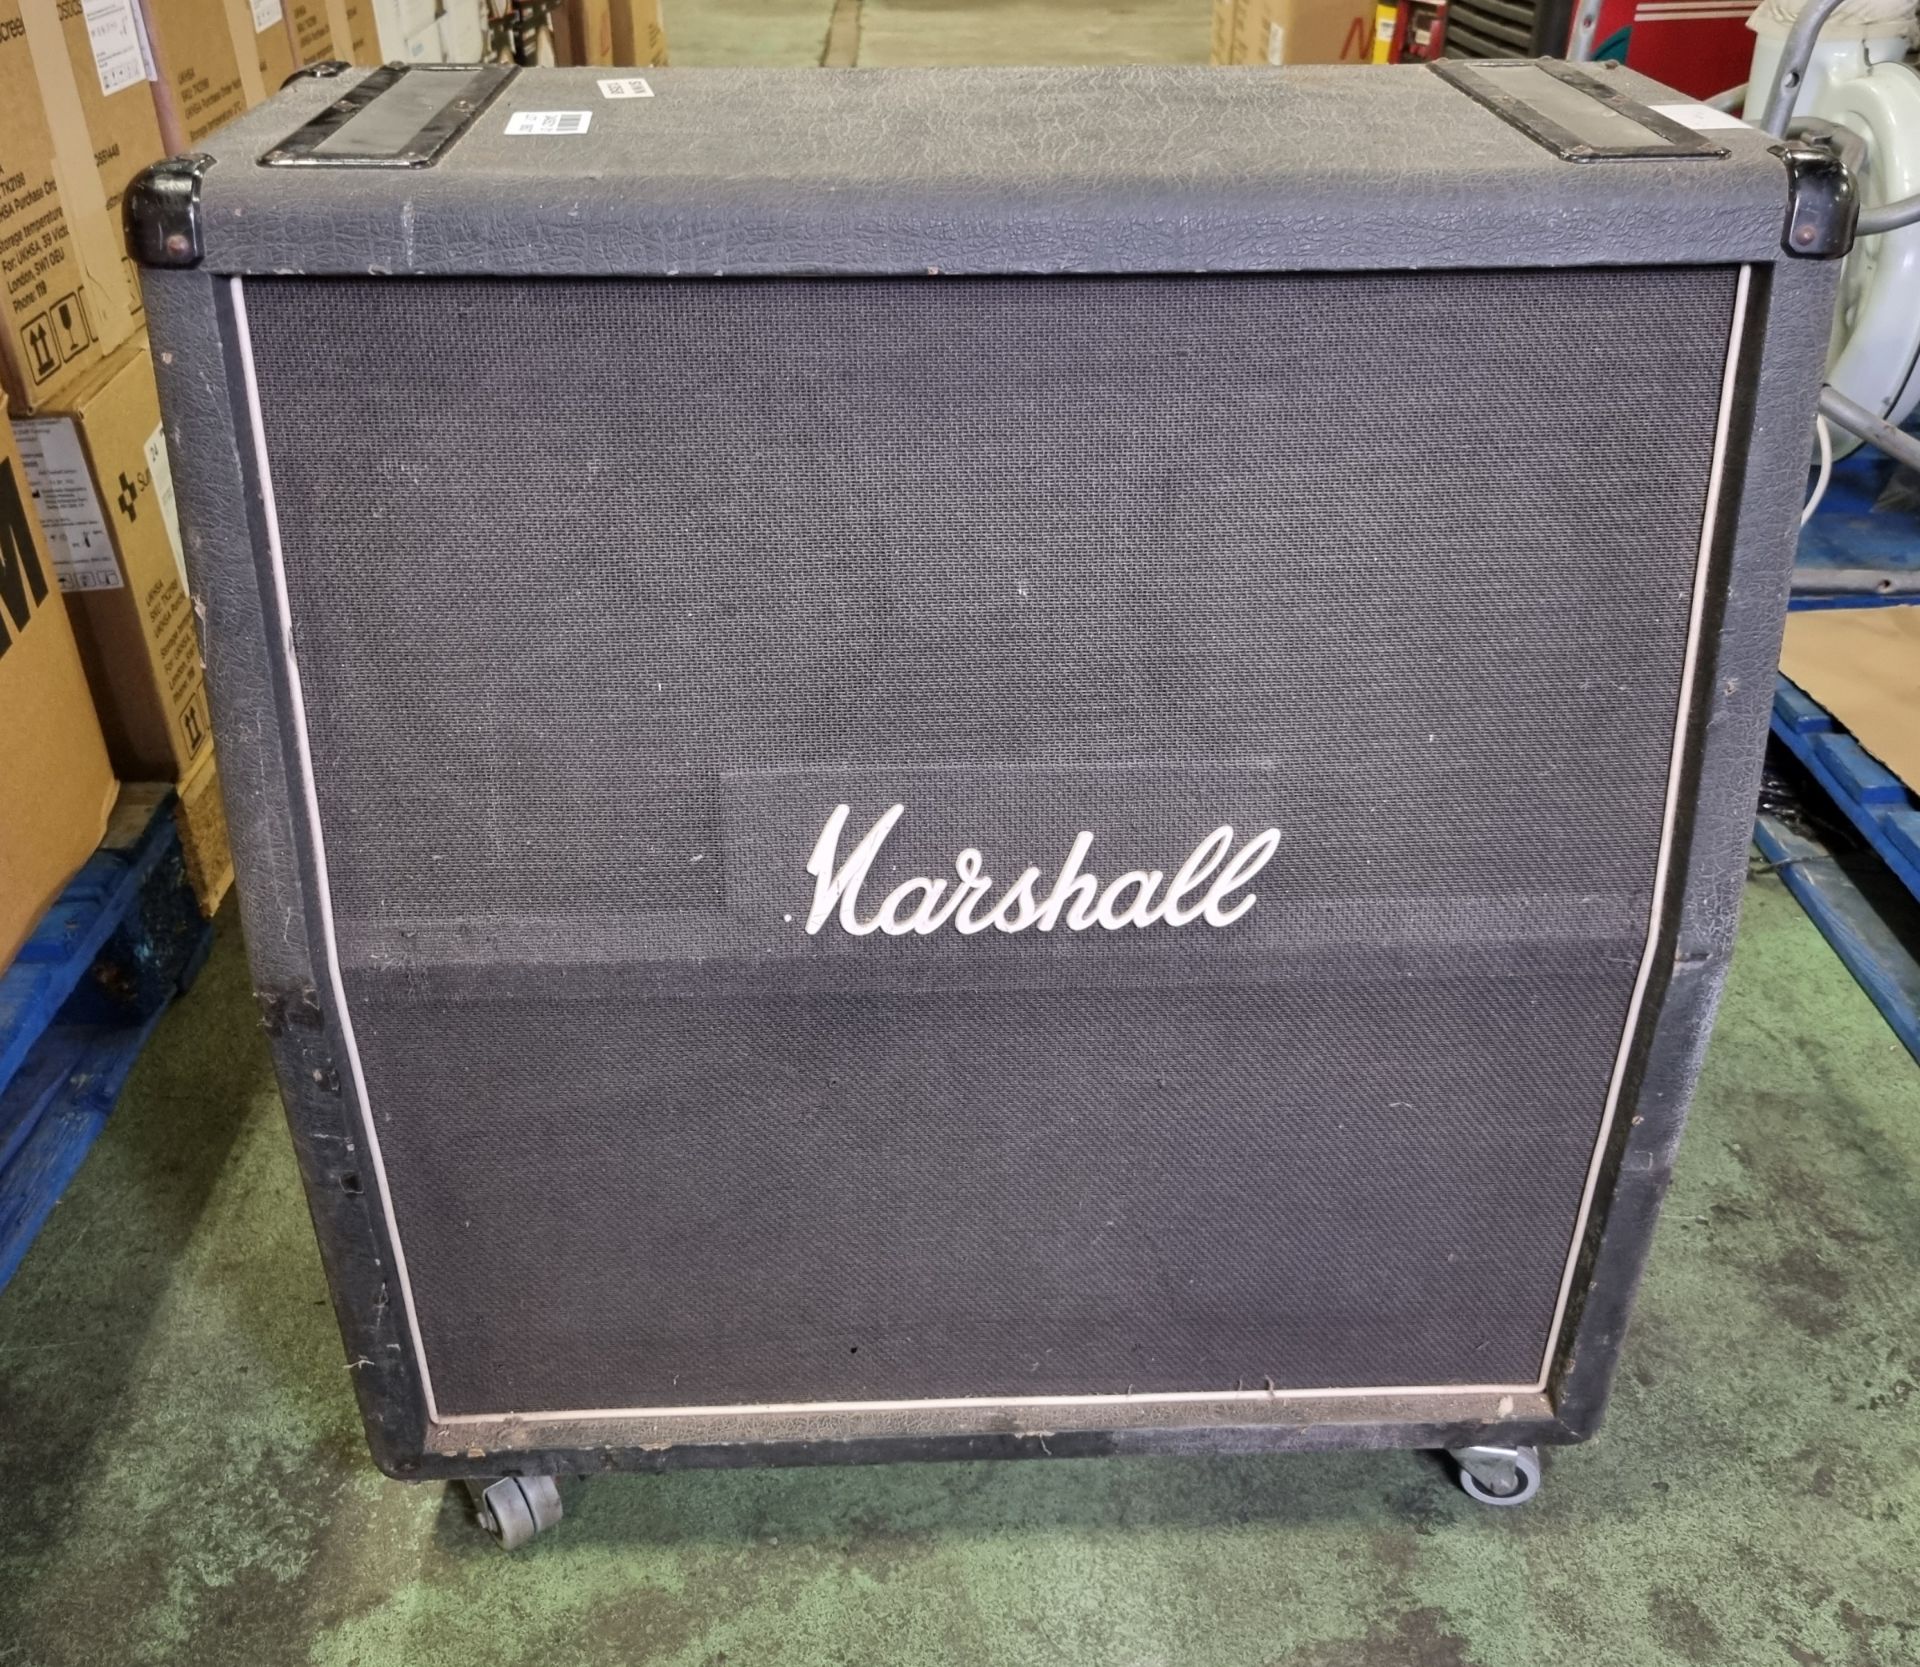 Marshall amplifier - MODEL UNKNOWN